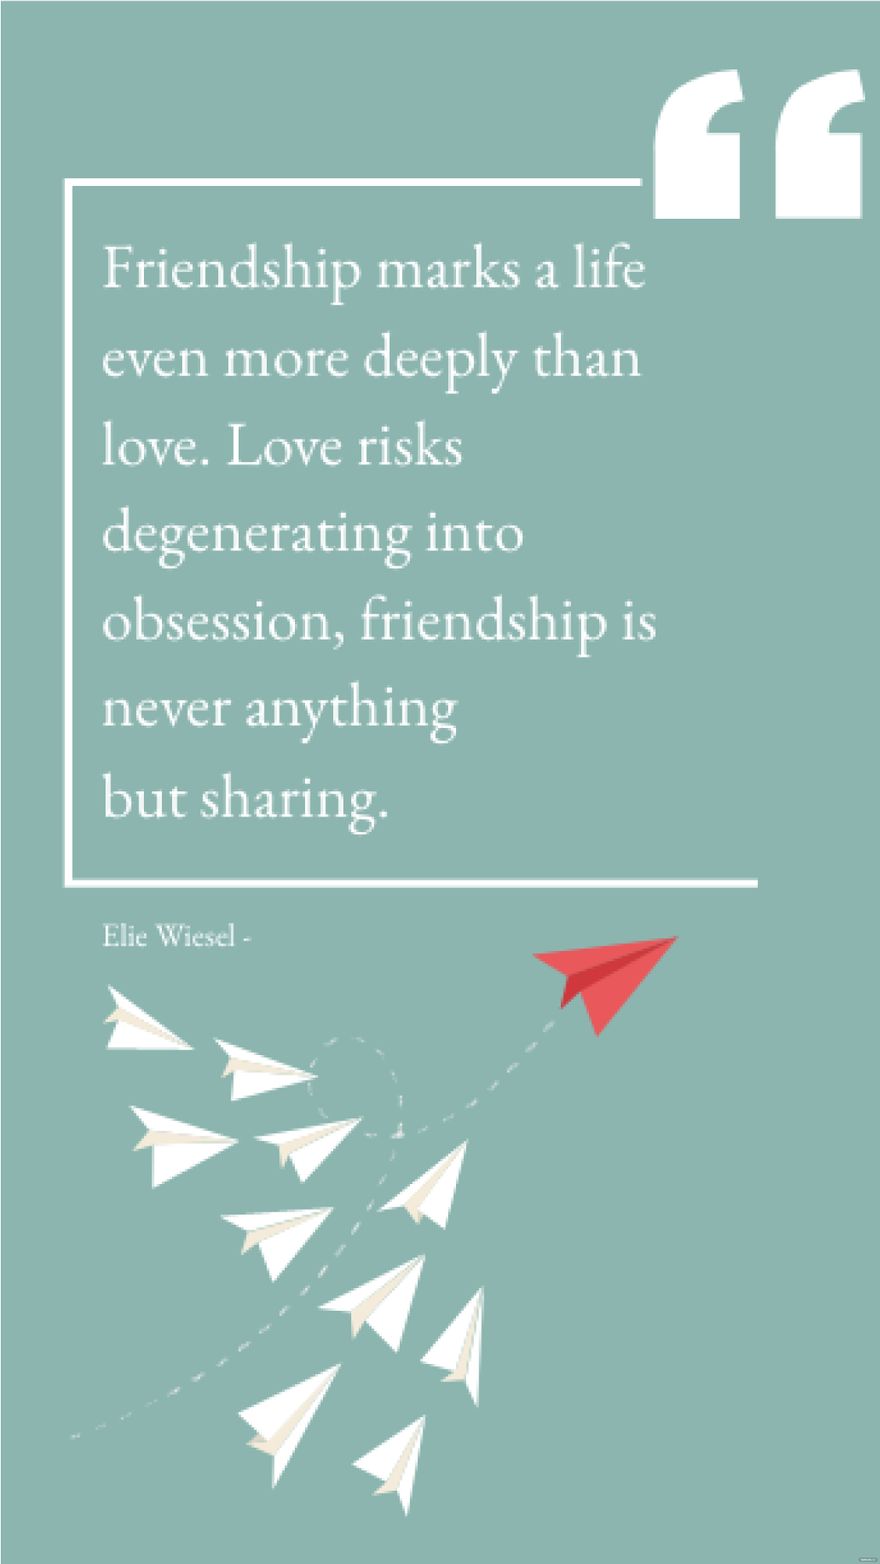 Elie Wiesel - Friendship marks a life even more deeply than love. Love risks degenerating into obsession, friendship is never anything but sharing.